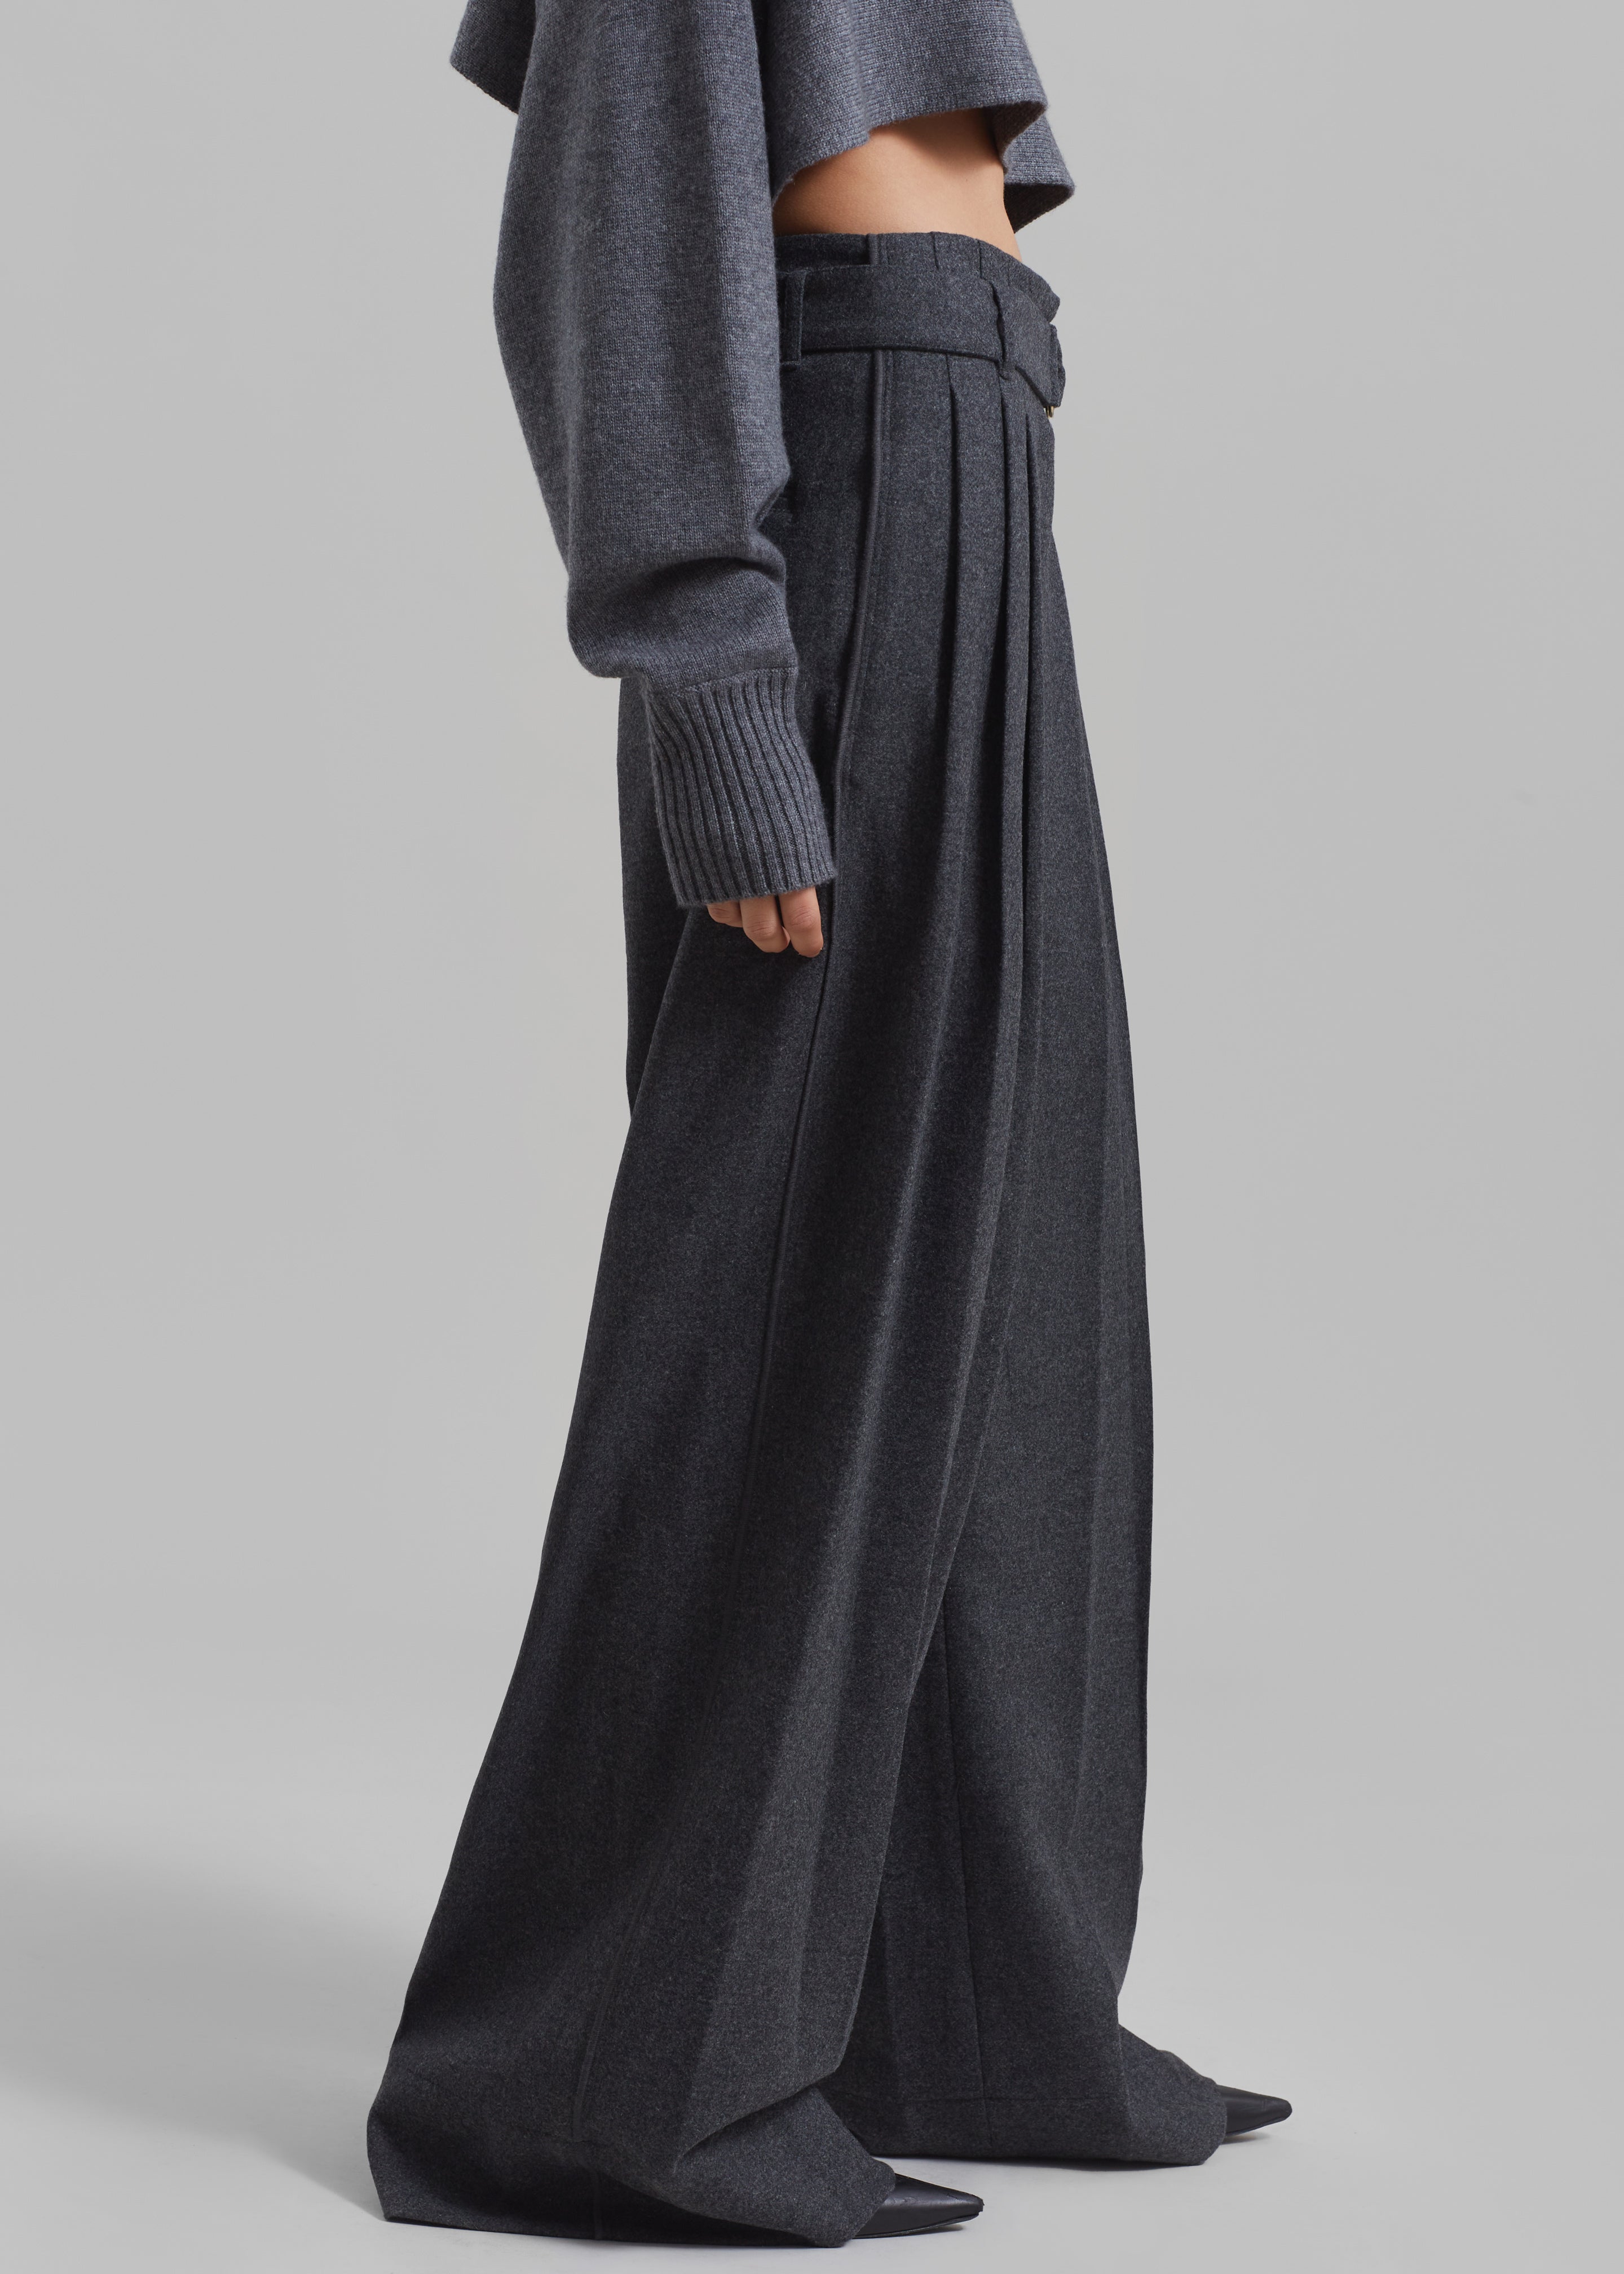 3.1 Phillip Lim Flannel Oversized Pleated Belted Pants - Charcoal - 4